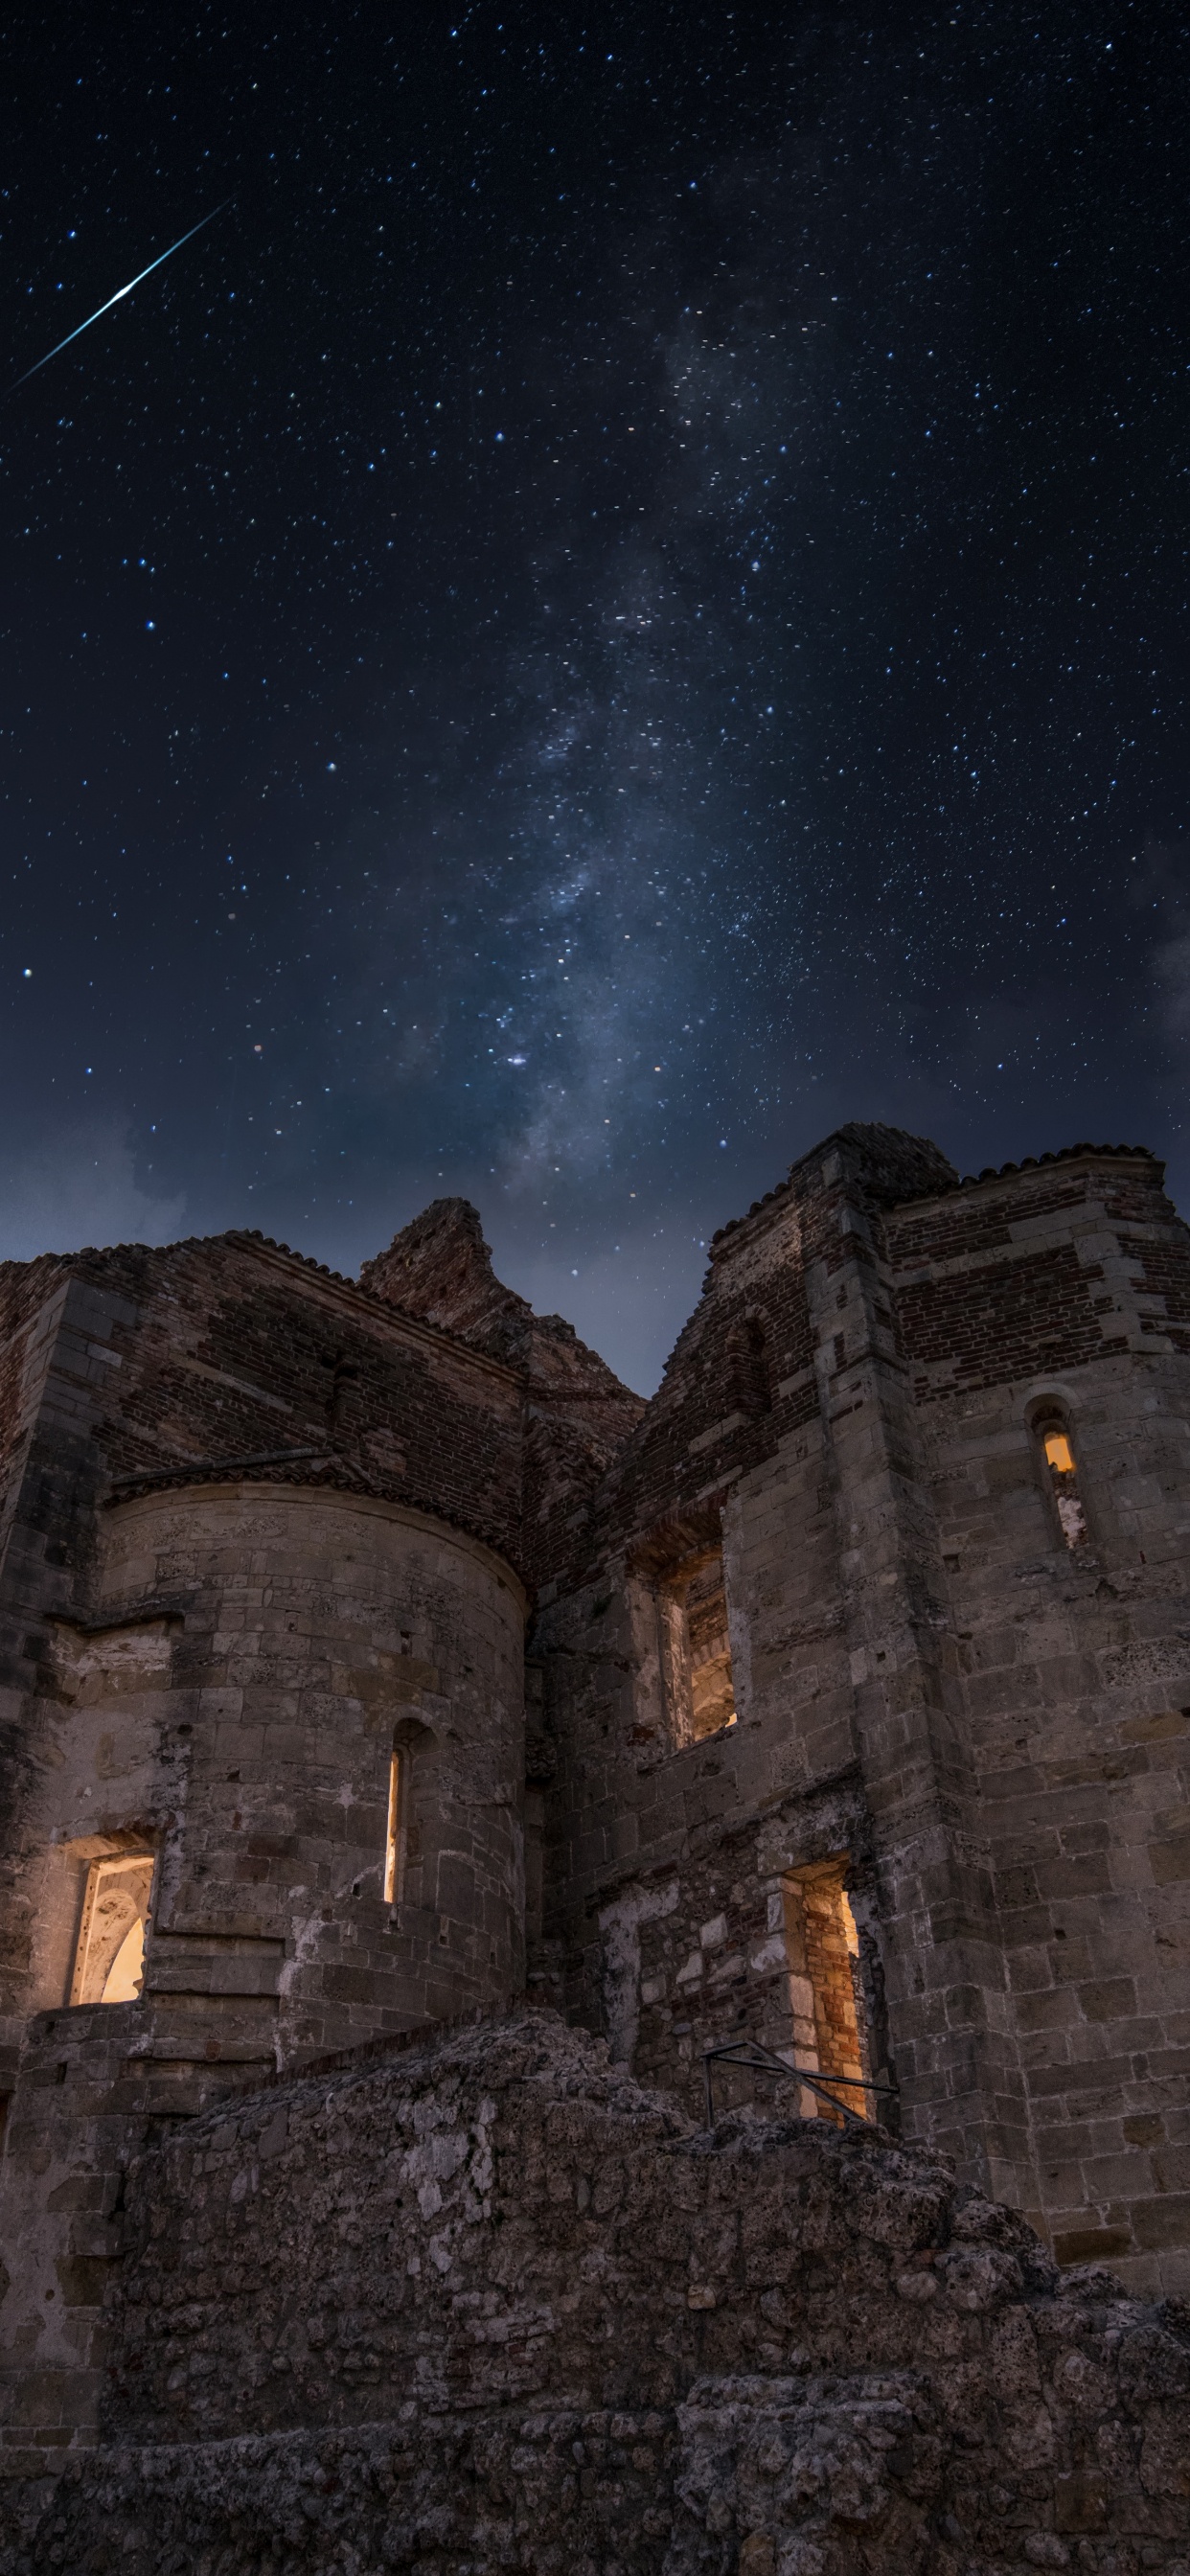 Nuit, Ruines, Atmosphère, Histoire Ancienne, Ciel. Wallpaper in 1242x2688 Resolution